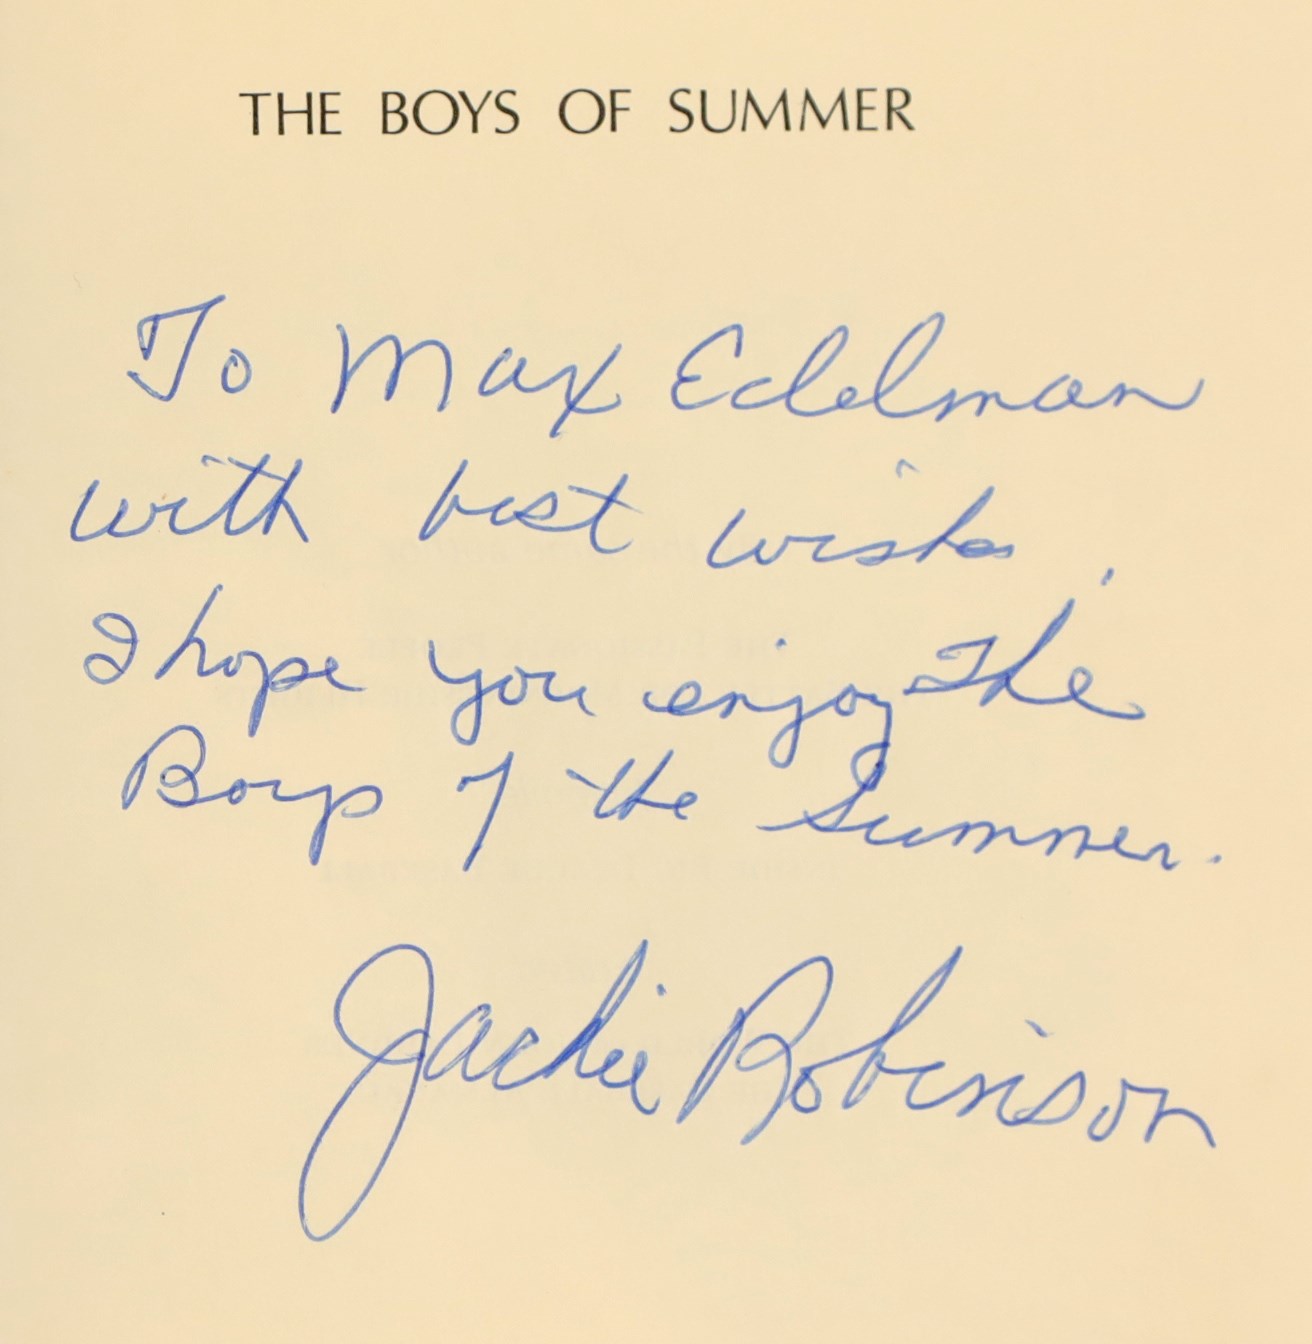 Jackie Robinson & Brooklyn Dodgers - Jackie Robinson " Boys of The Summer" Signed Book (PSA)